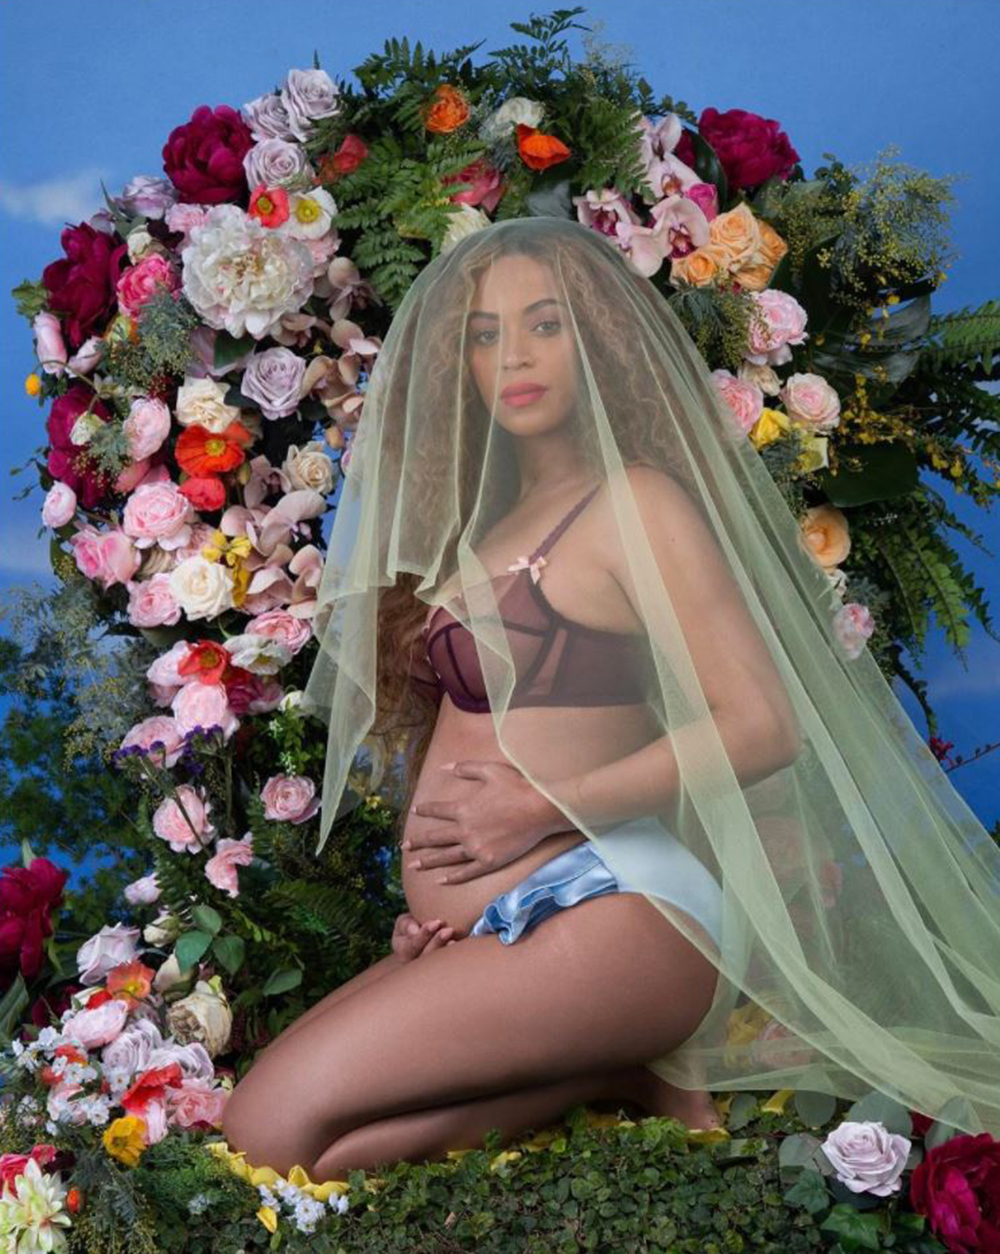 most-liked-instagrams-2017-beyonce-pregnancy-annoucement